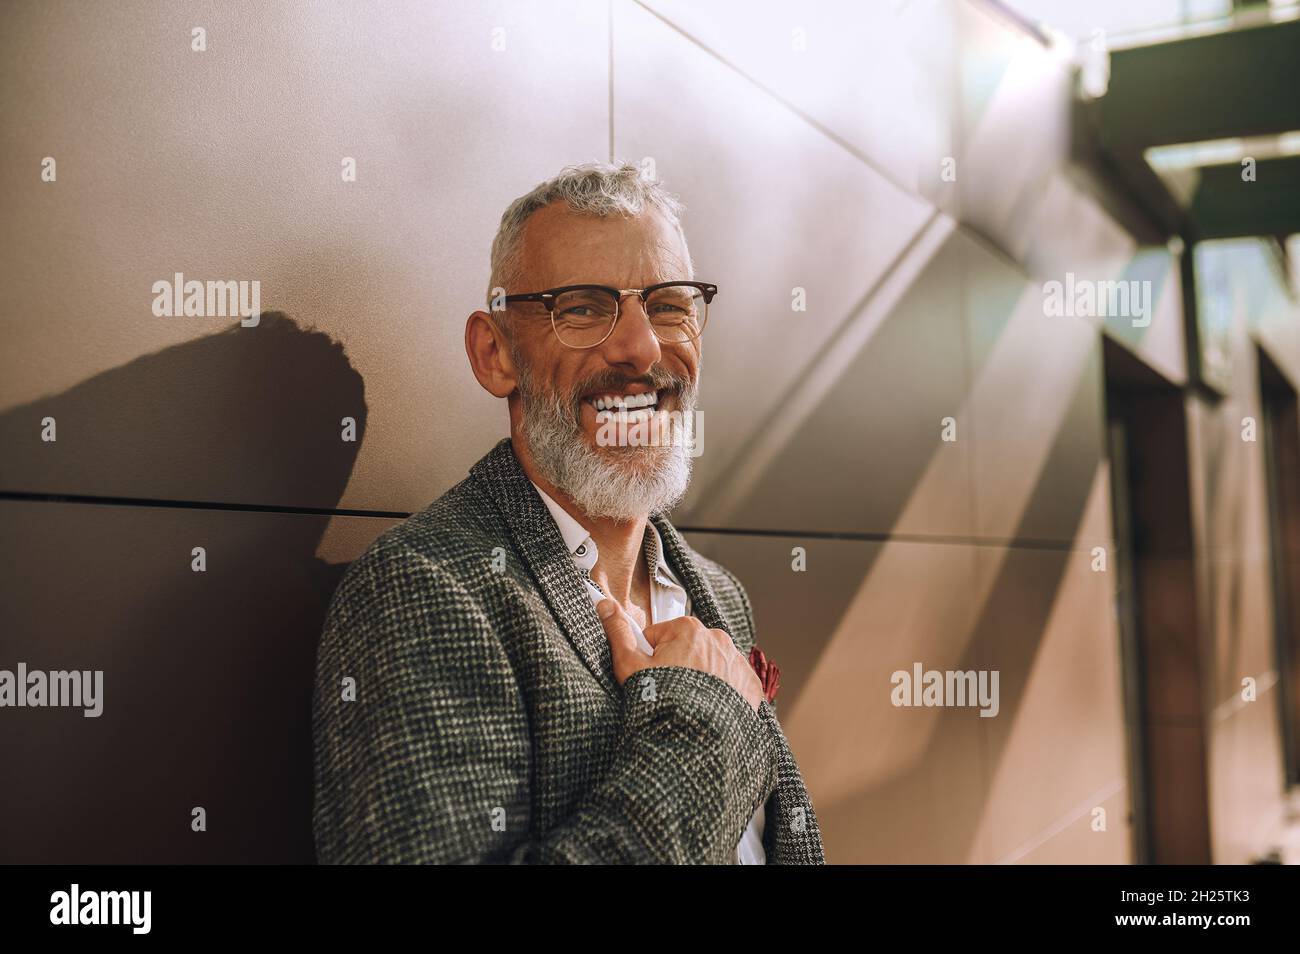 High-spirited bespectacled male leaning against the building wall Stock Photo